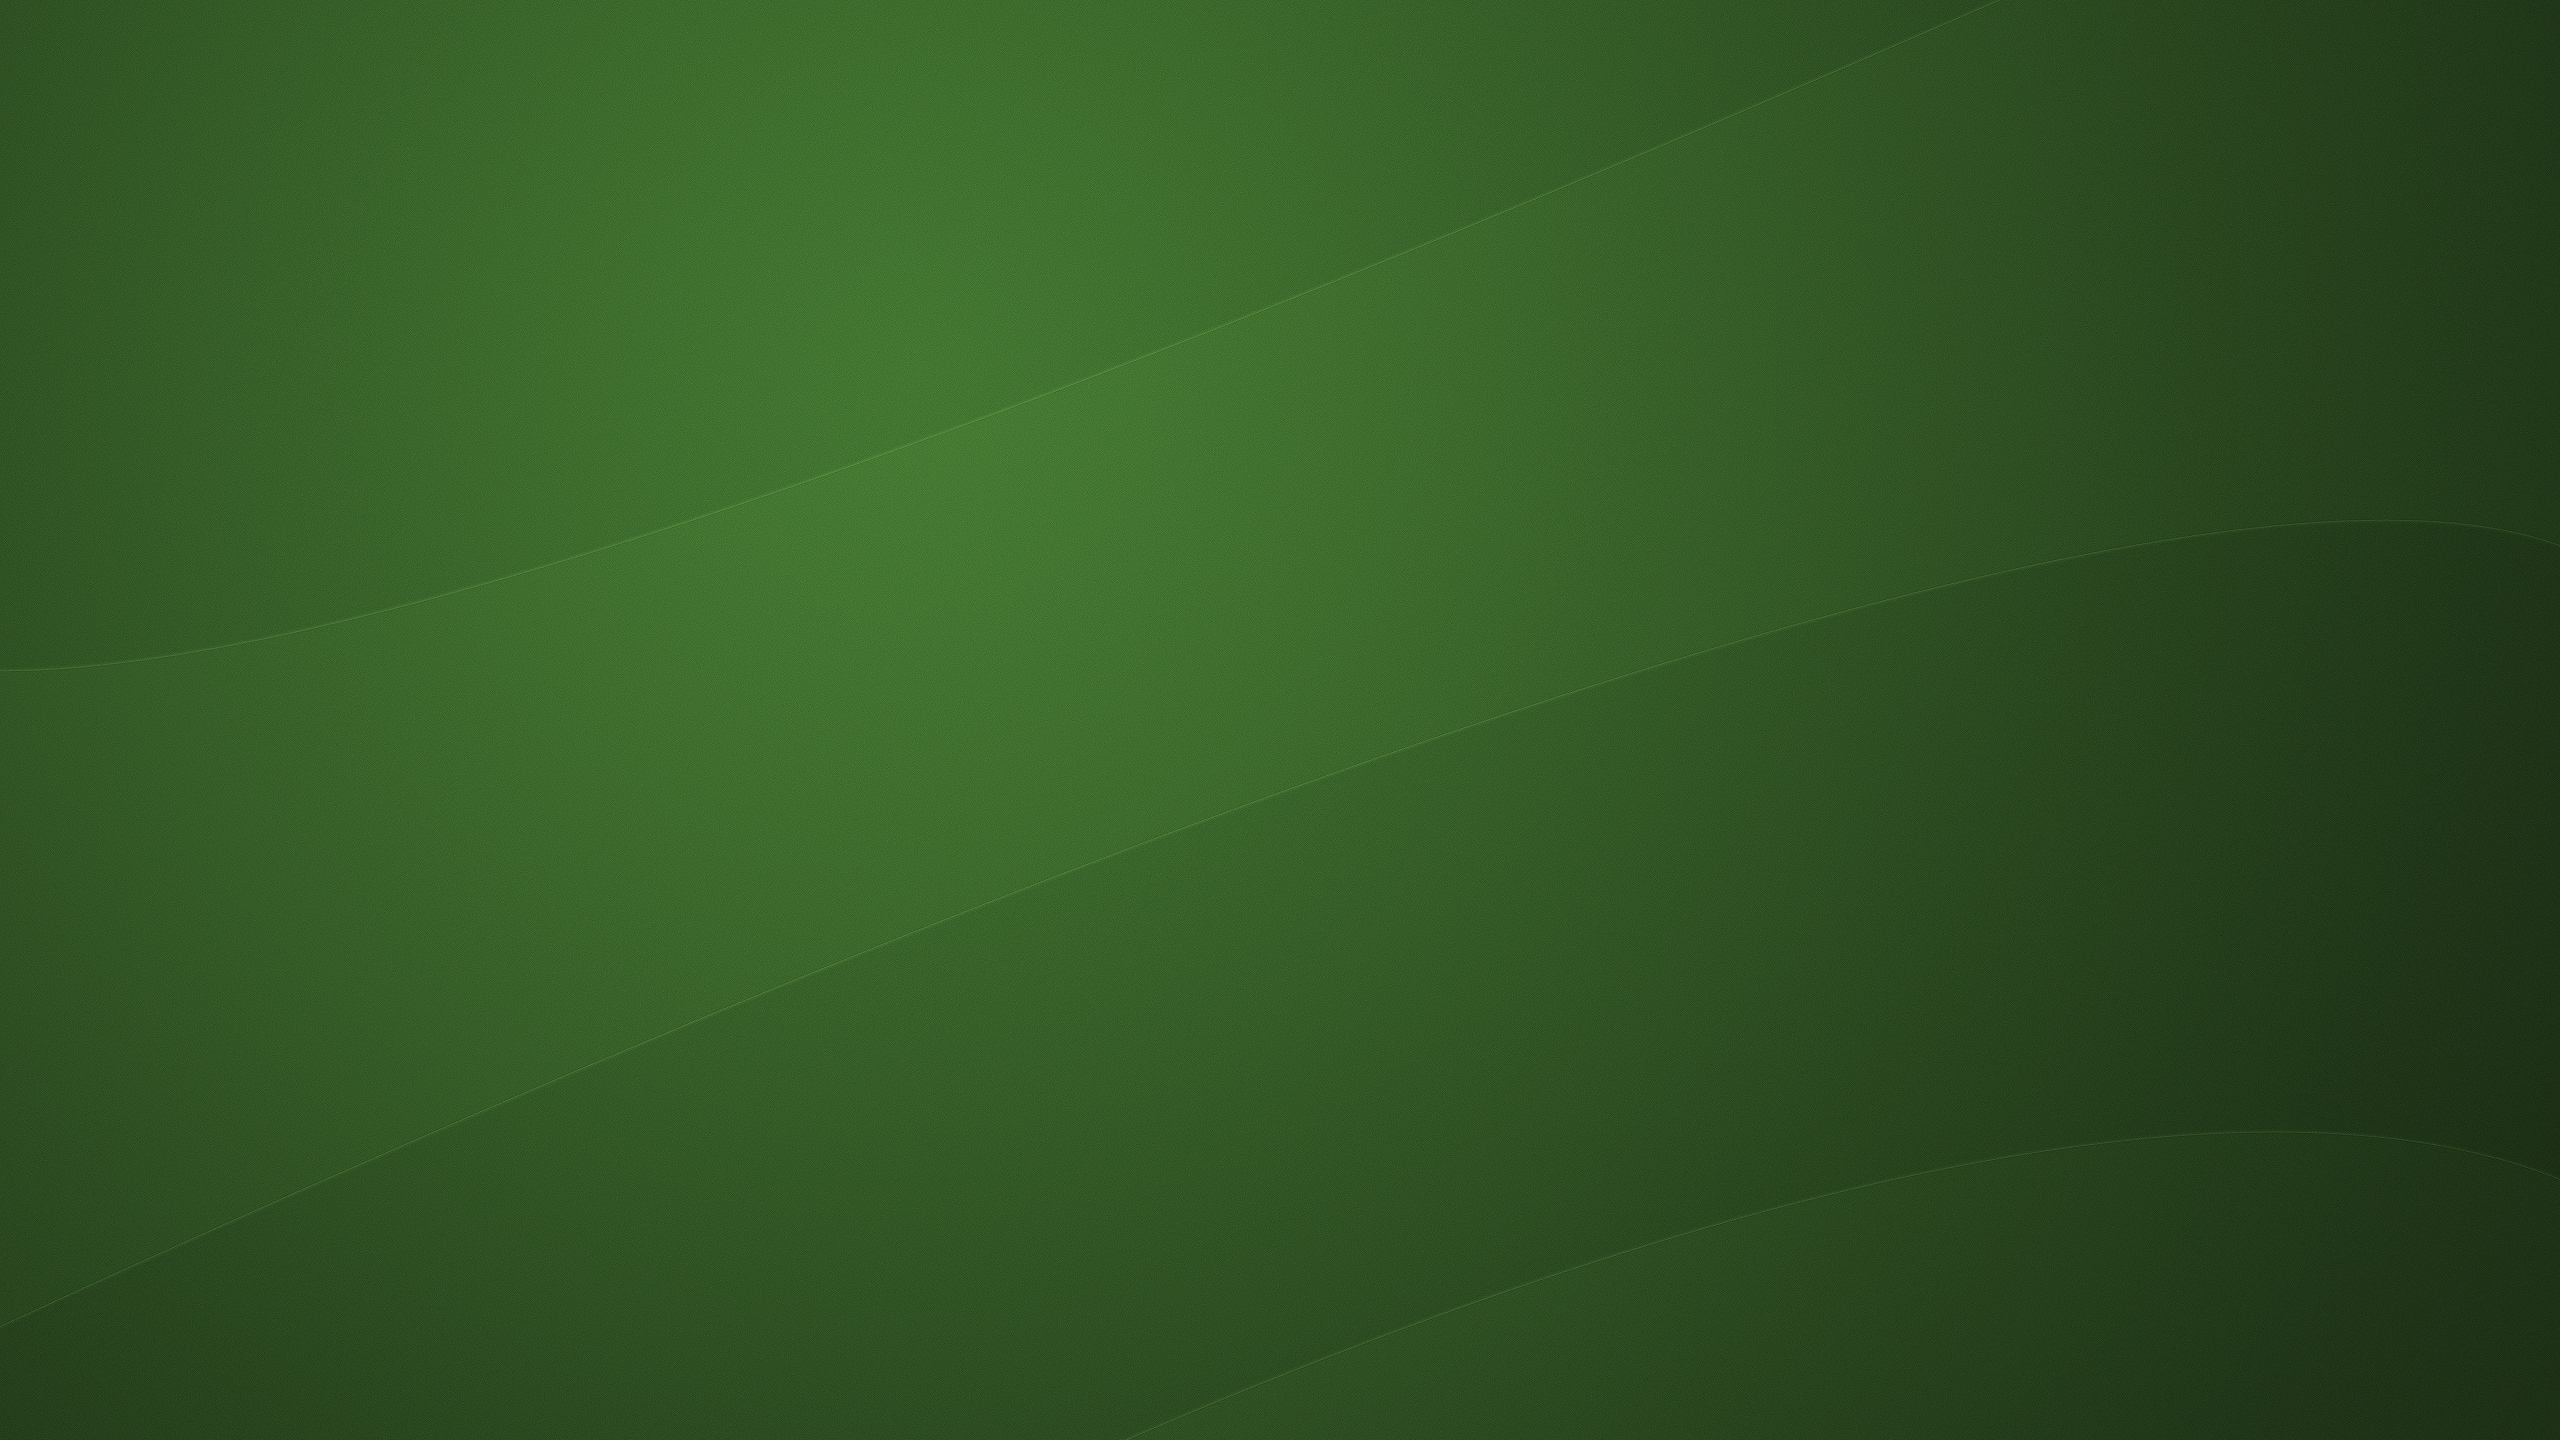 Green and White Light Illustration. Wallpaper in 2560x1440 Resolution